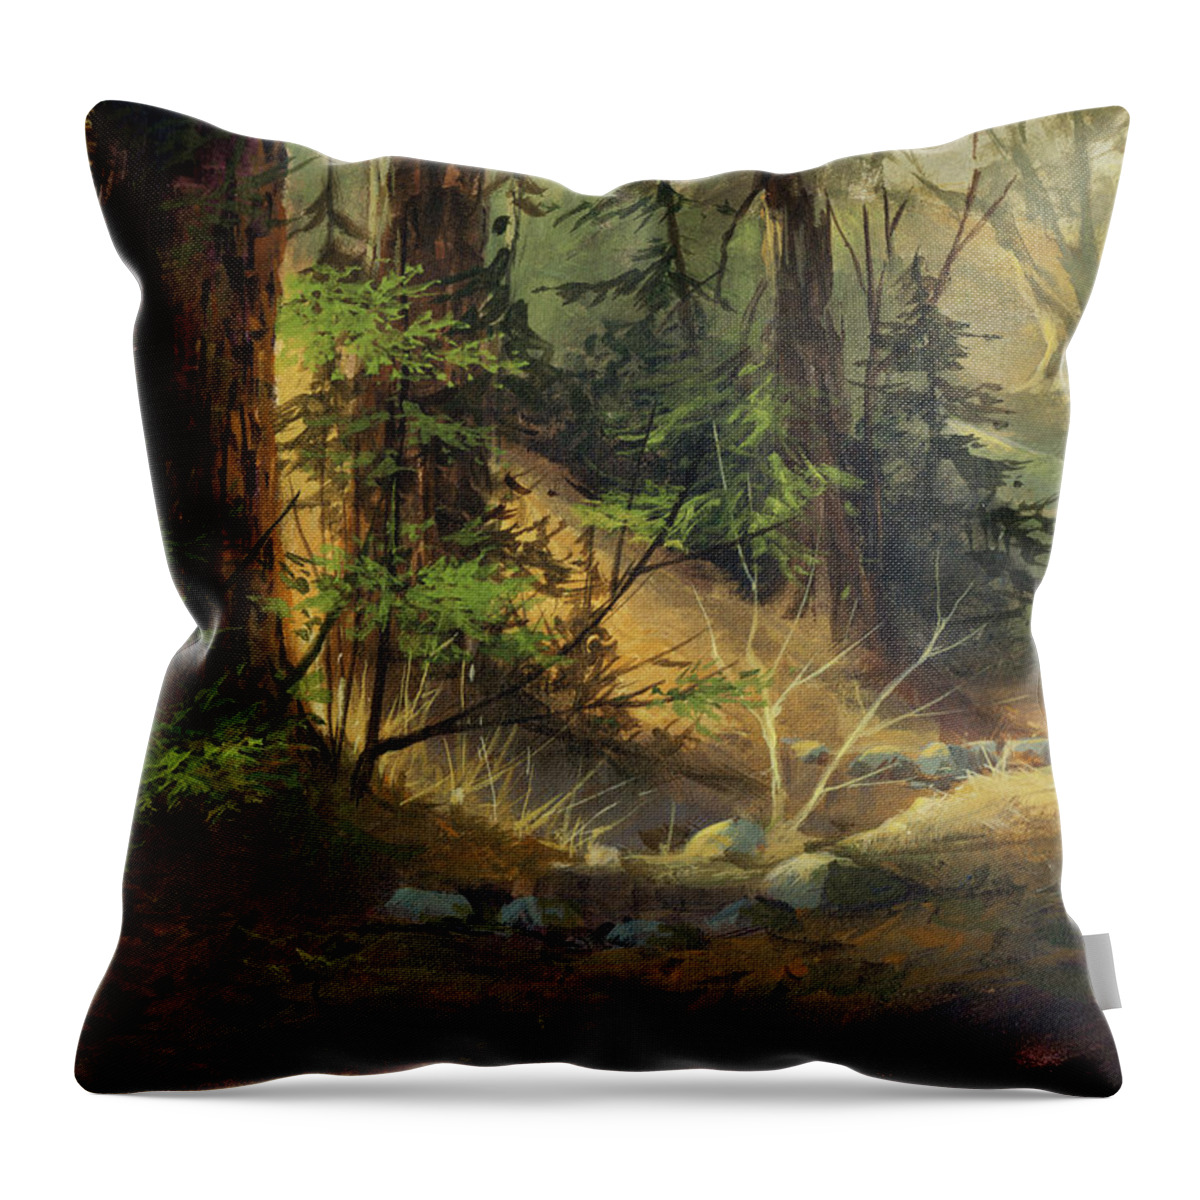 Michael Humphries Throw Pillow featuring the painting Morning Redwoods by Michael Humphries